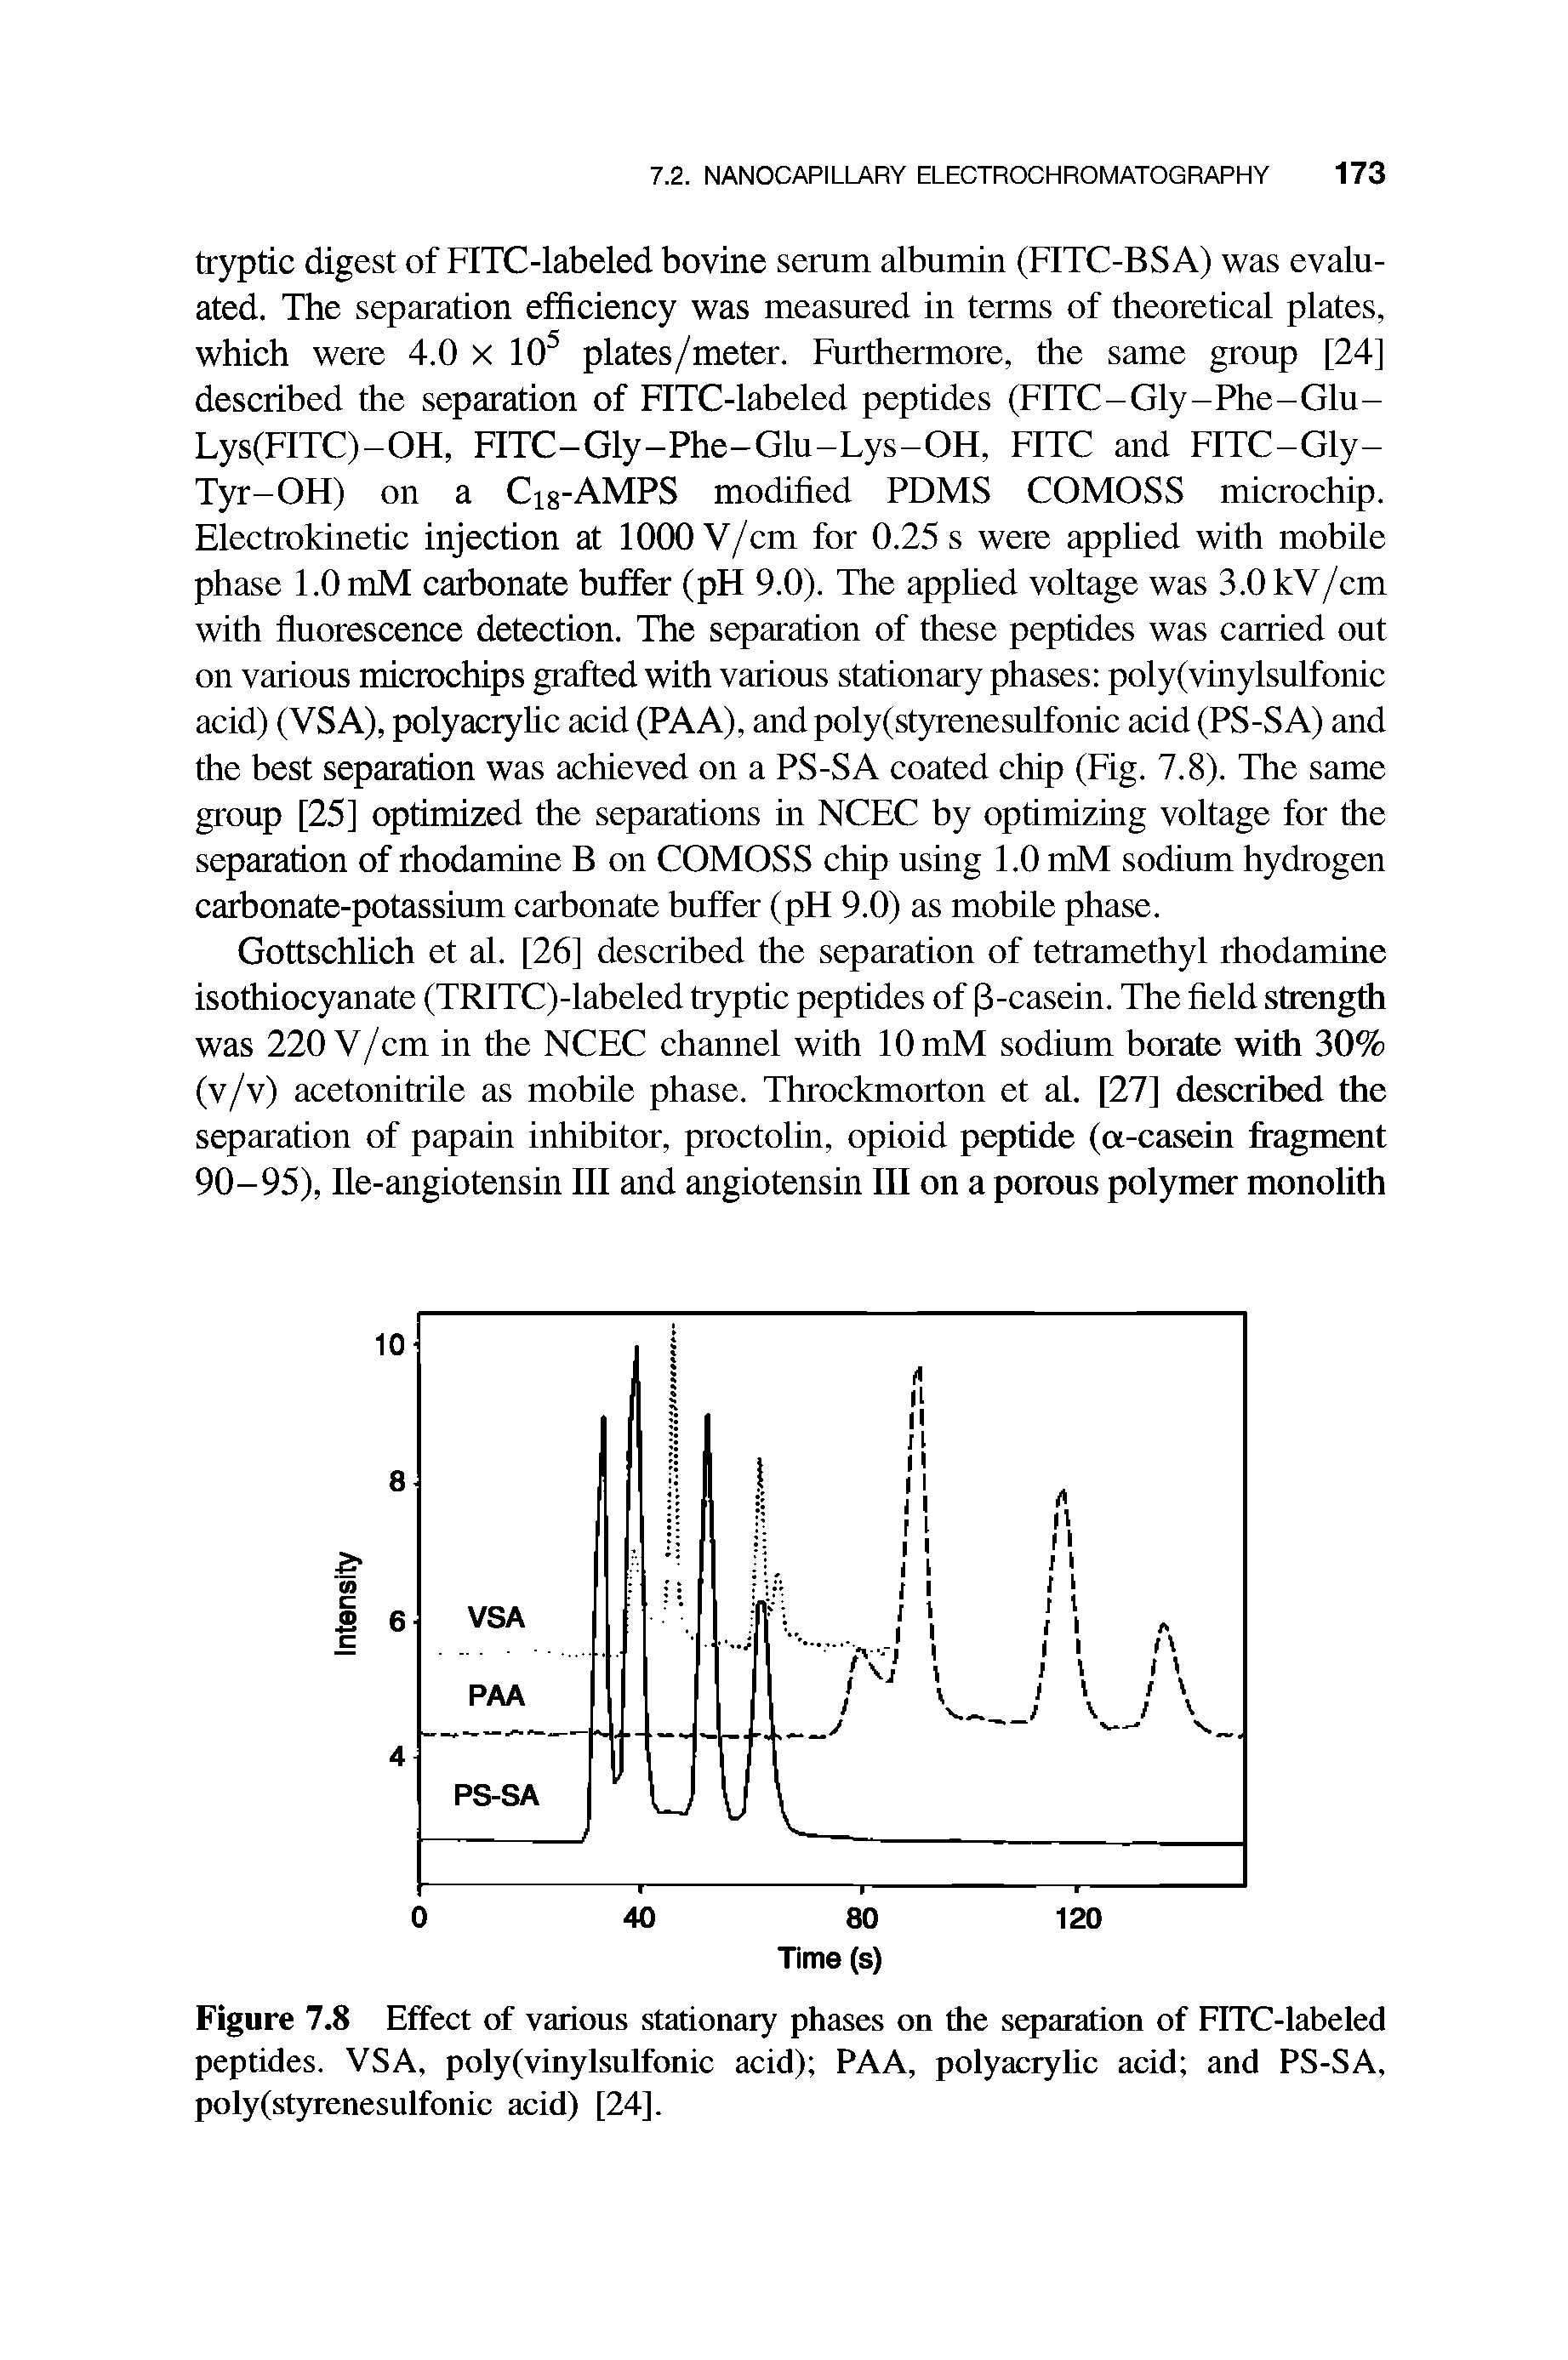 Figure 7.8 Effect of various stationary phases on the separation of FITC-labeled peptides. VSA, poly(vinylsulfonic acid) PAA, polyacrylic acid and PS-SA, poly(styrenesulfonic acid) [24].